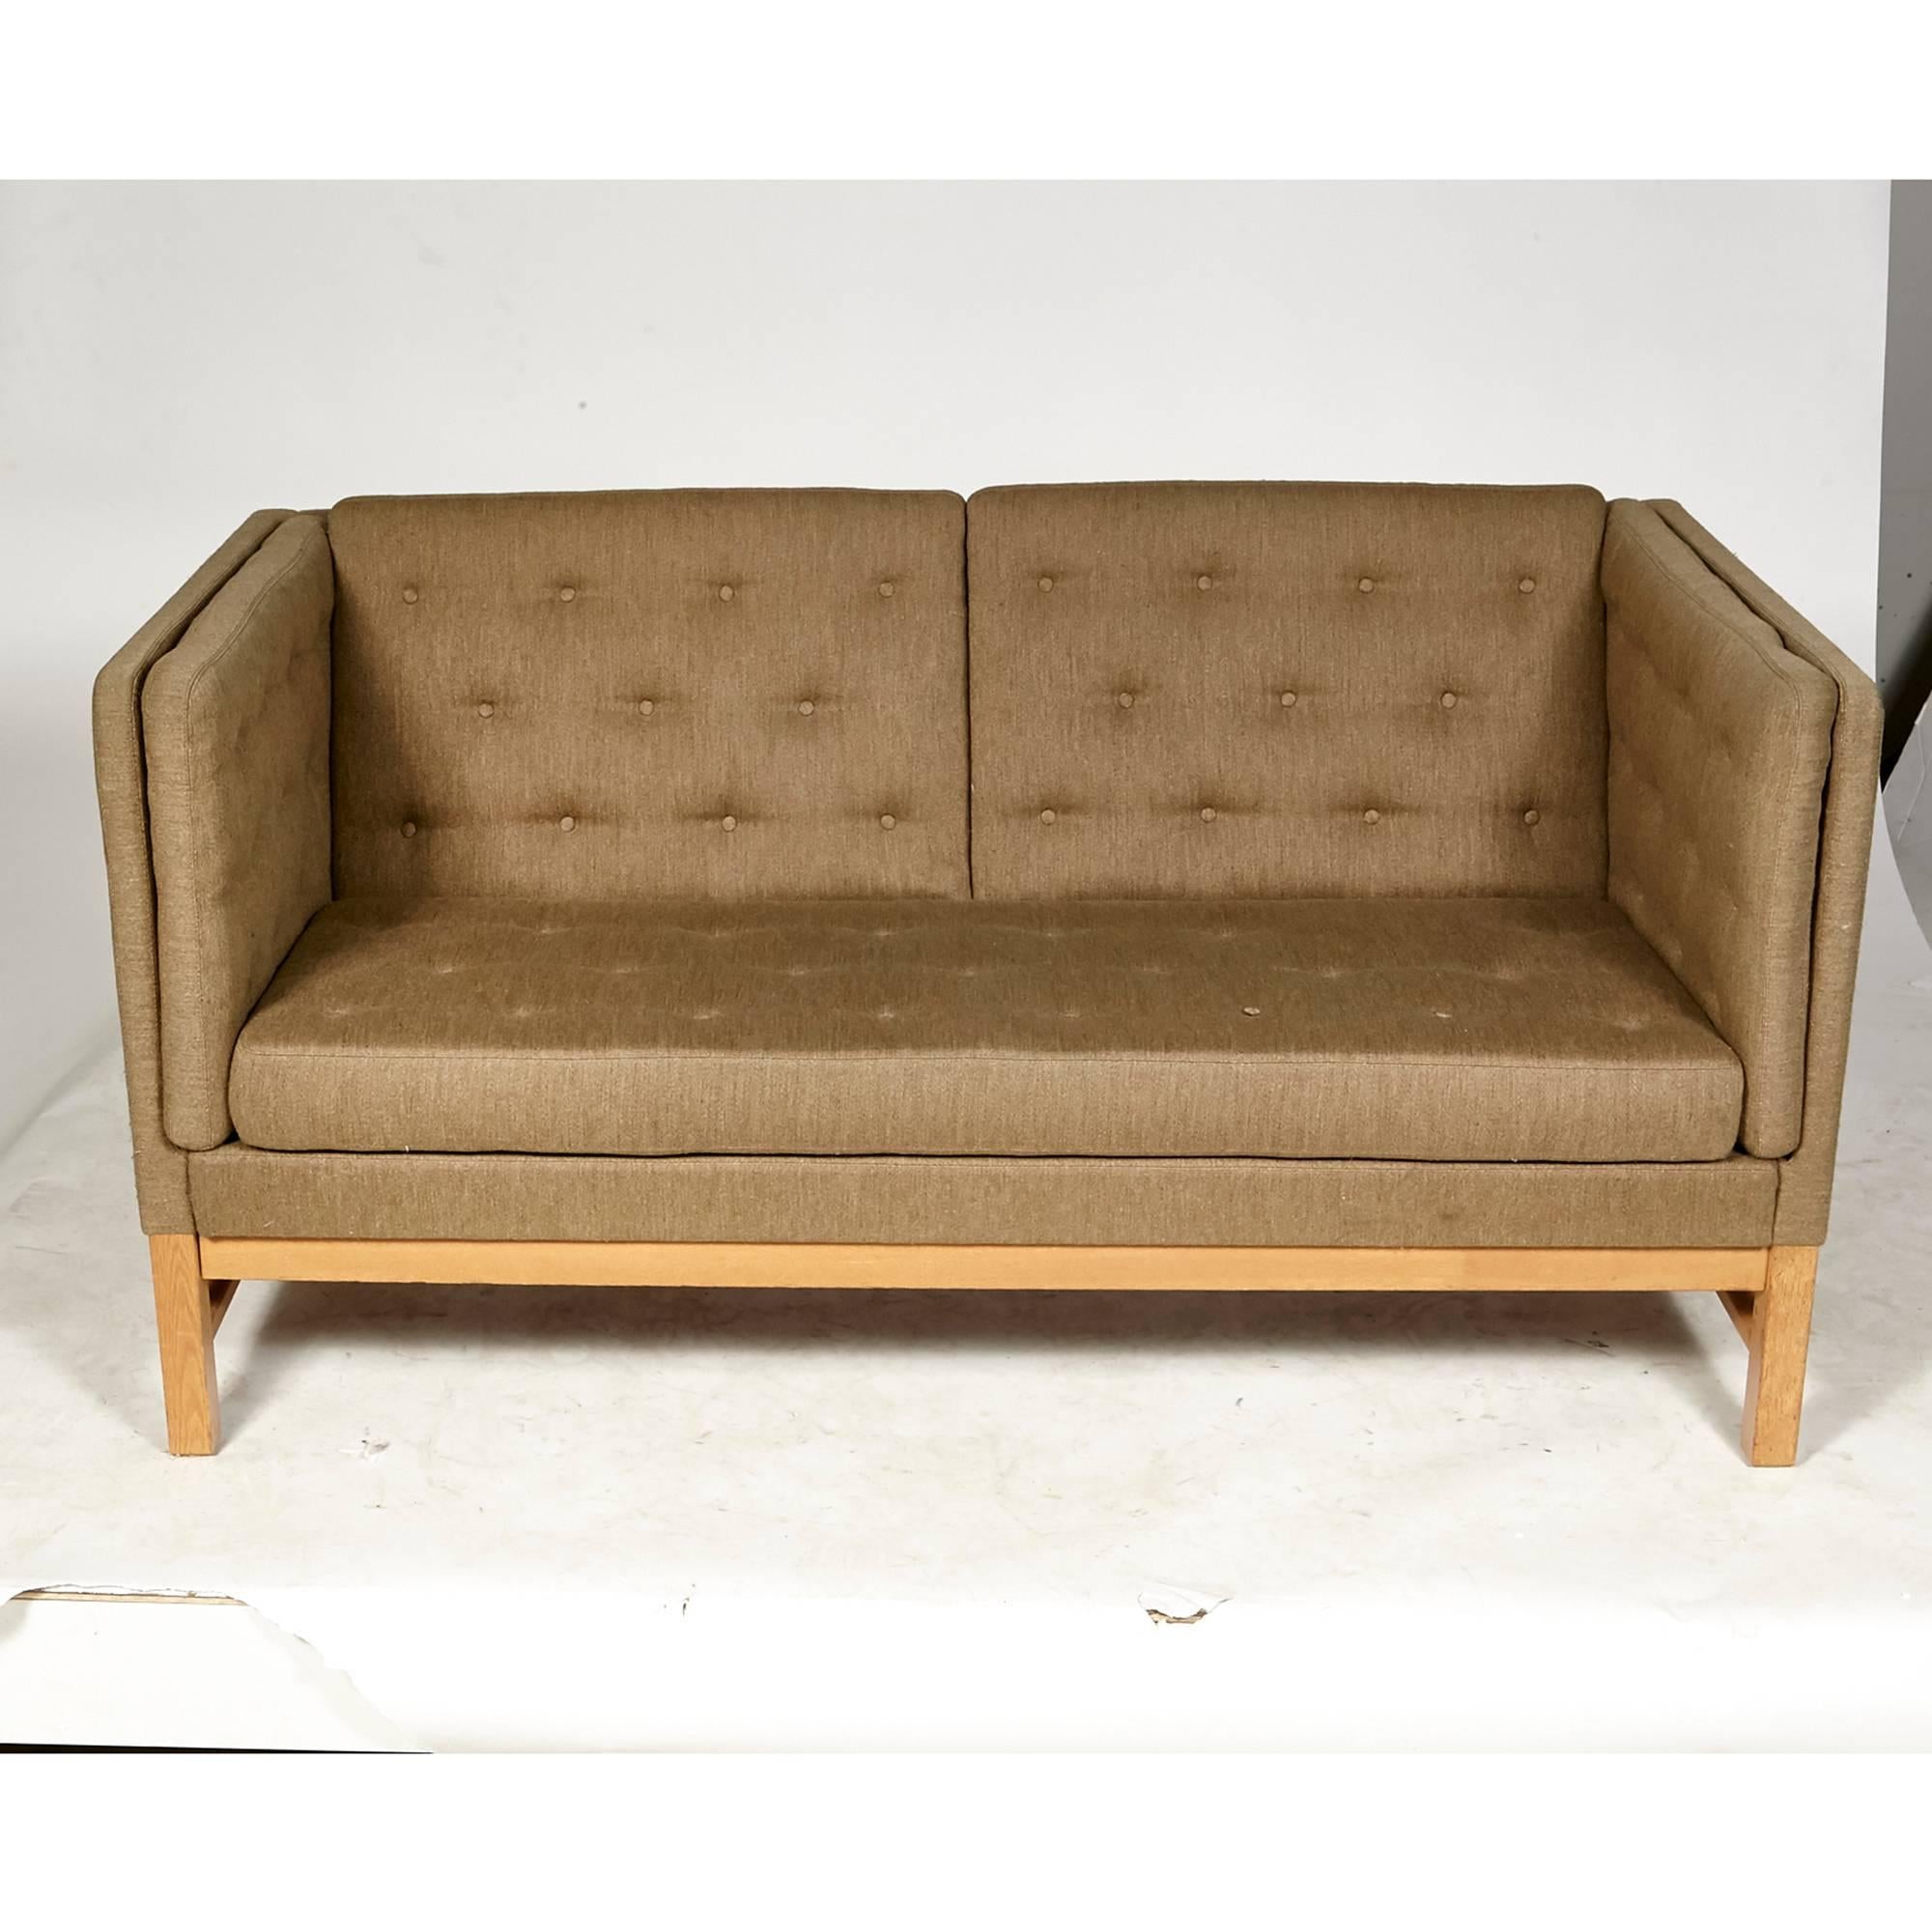 Vintage two-seat tufted sofa in the original olive wool tweed fabric on an oak frame designed by Erik Ole Jørgensen for Svendborg, Denmark, circa mid-1970s. Arm height: 30.5in.